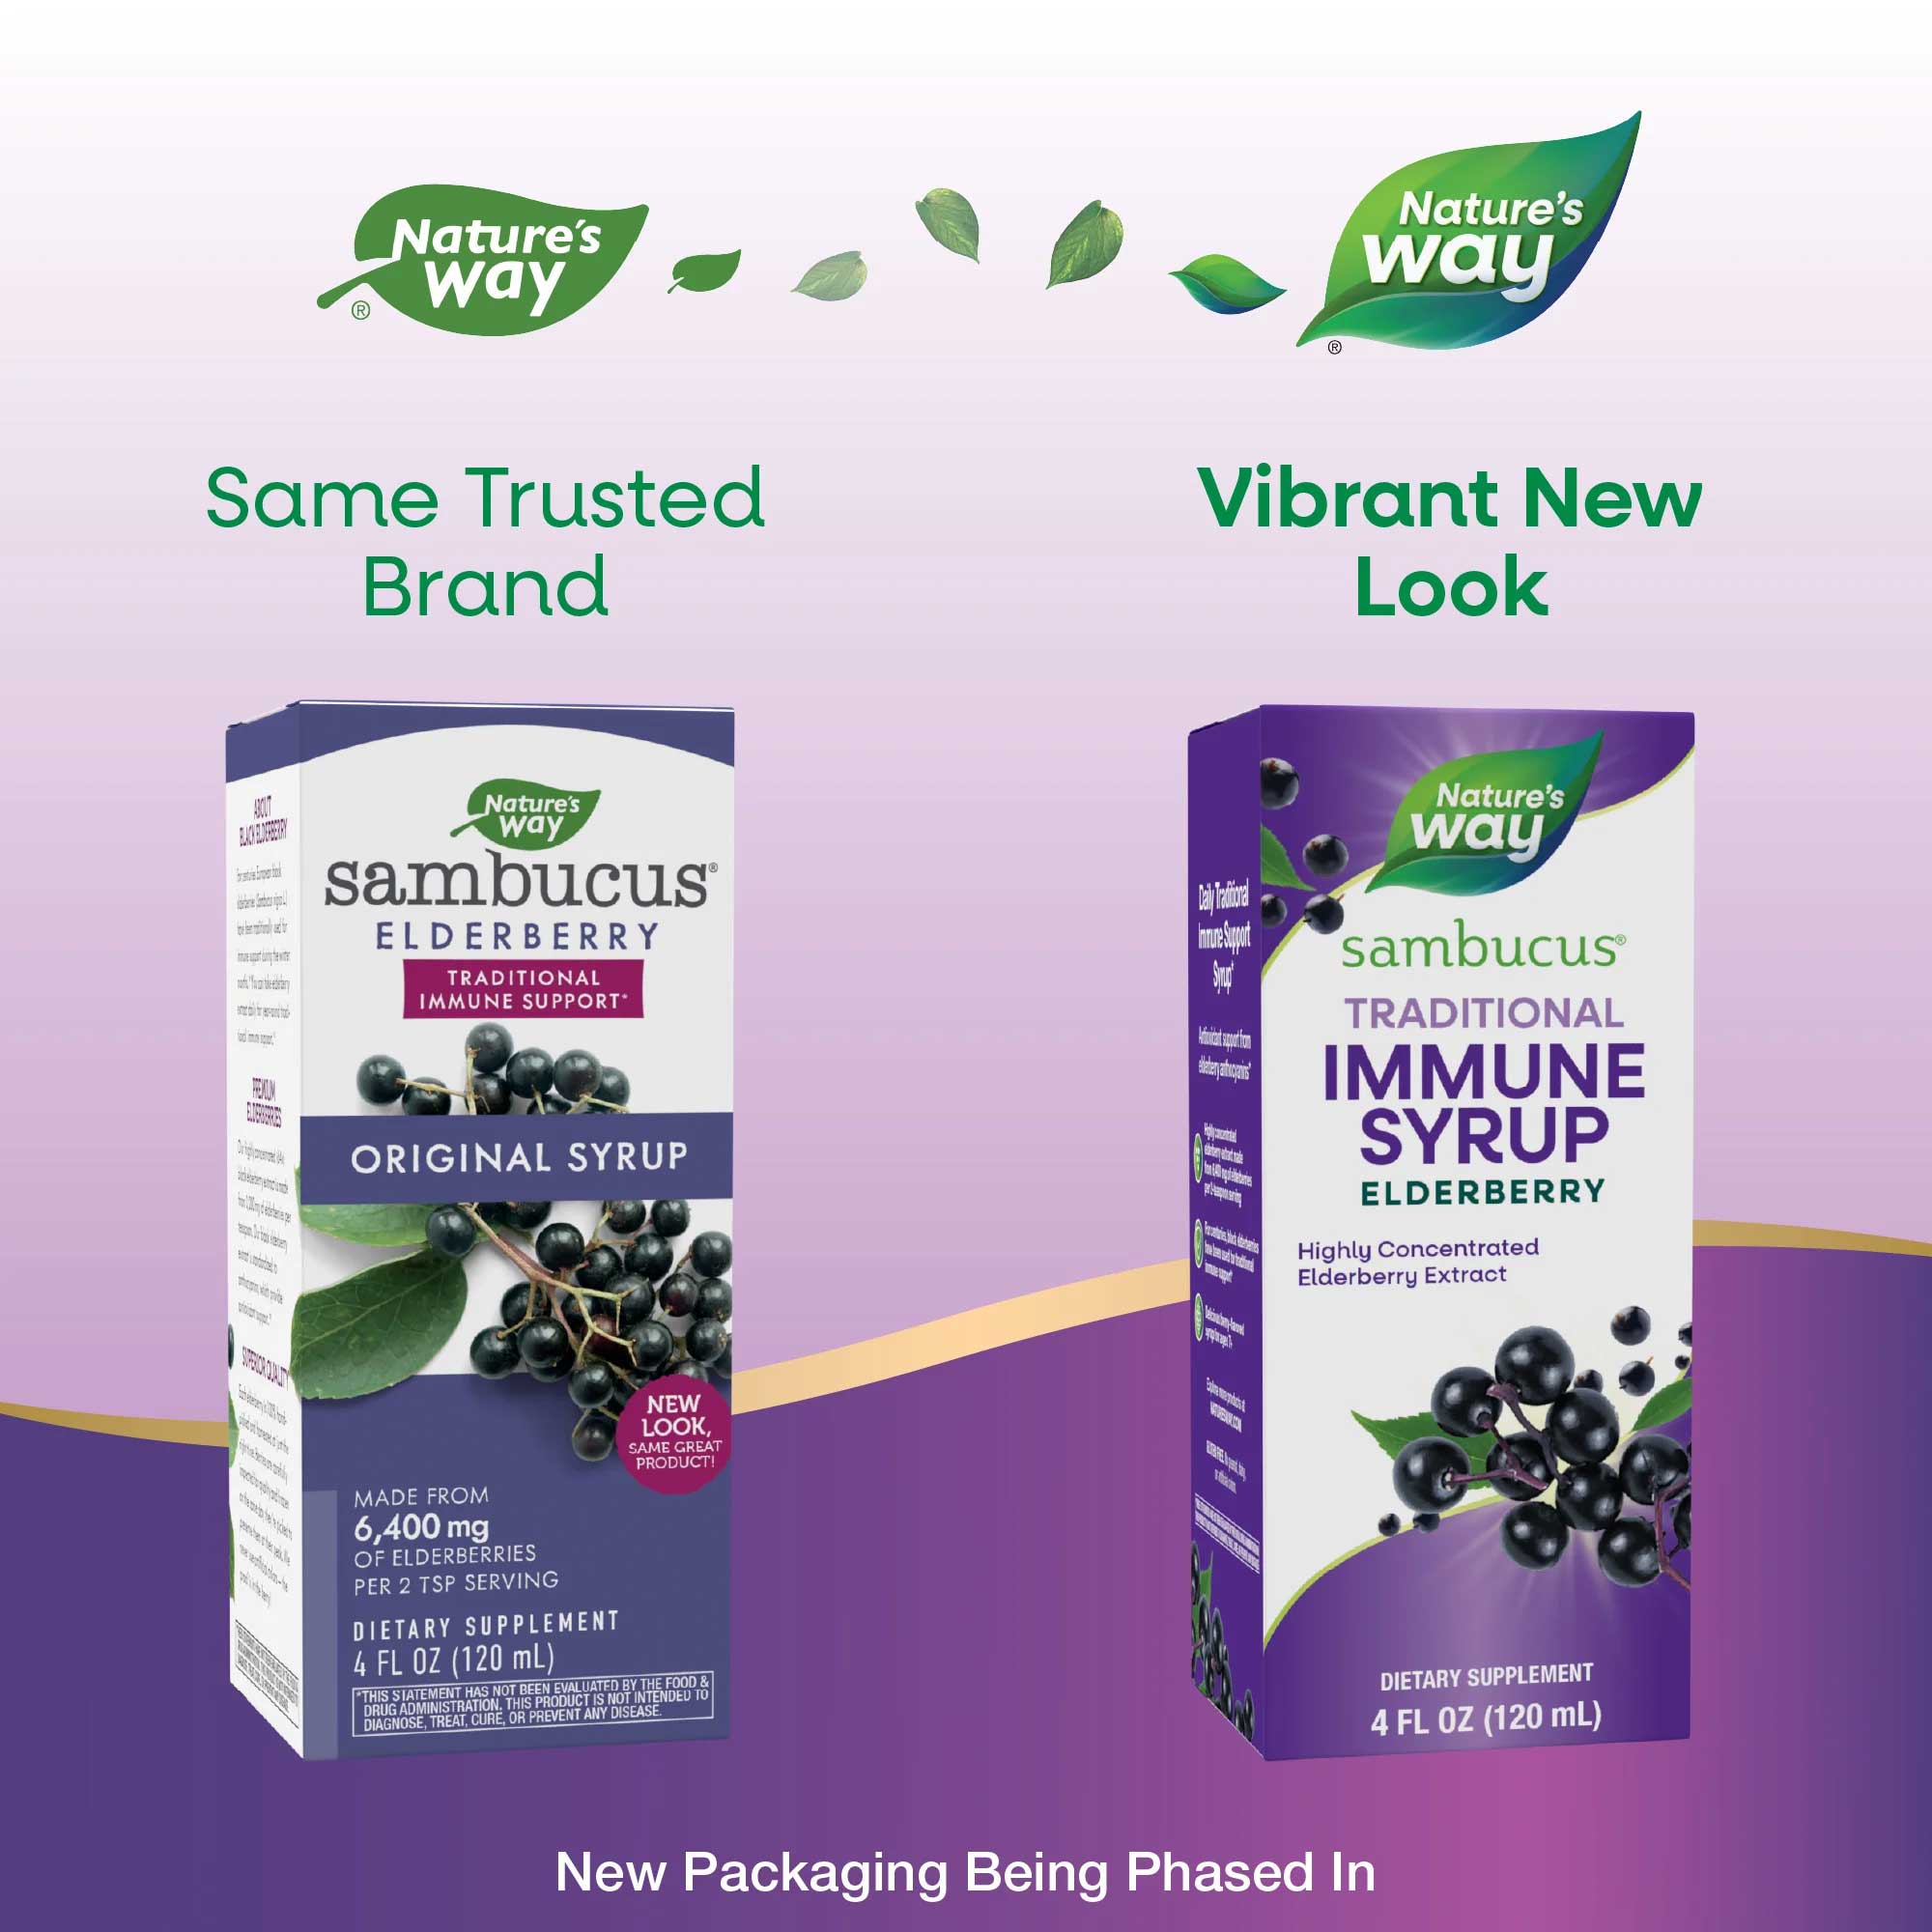 Nature's Way Sambucus Traditional Immune Syrup (Formerly Original Syrup) New Look